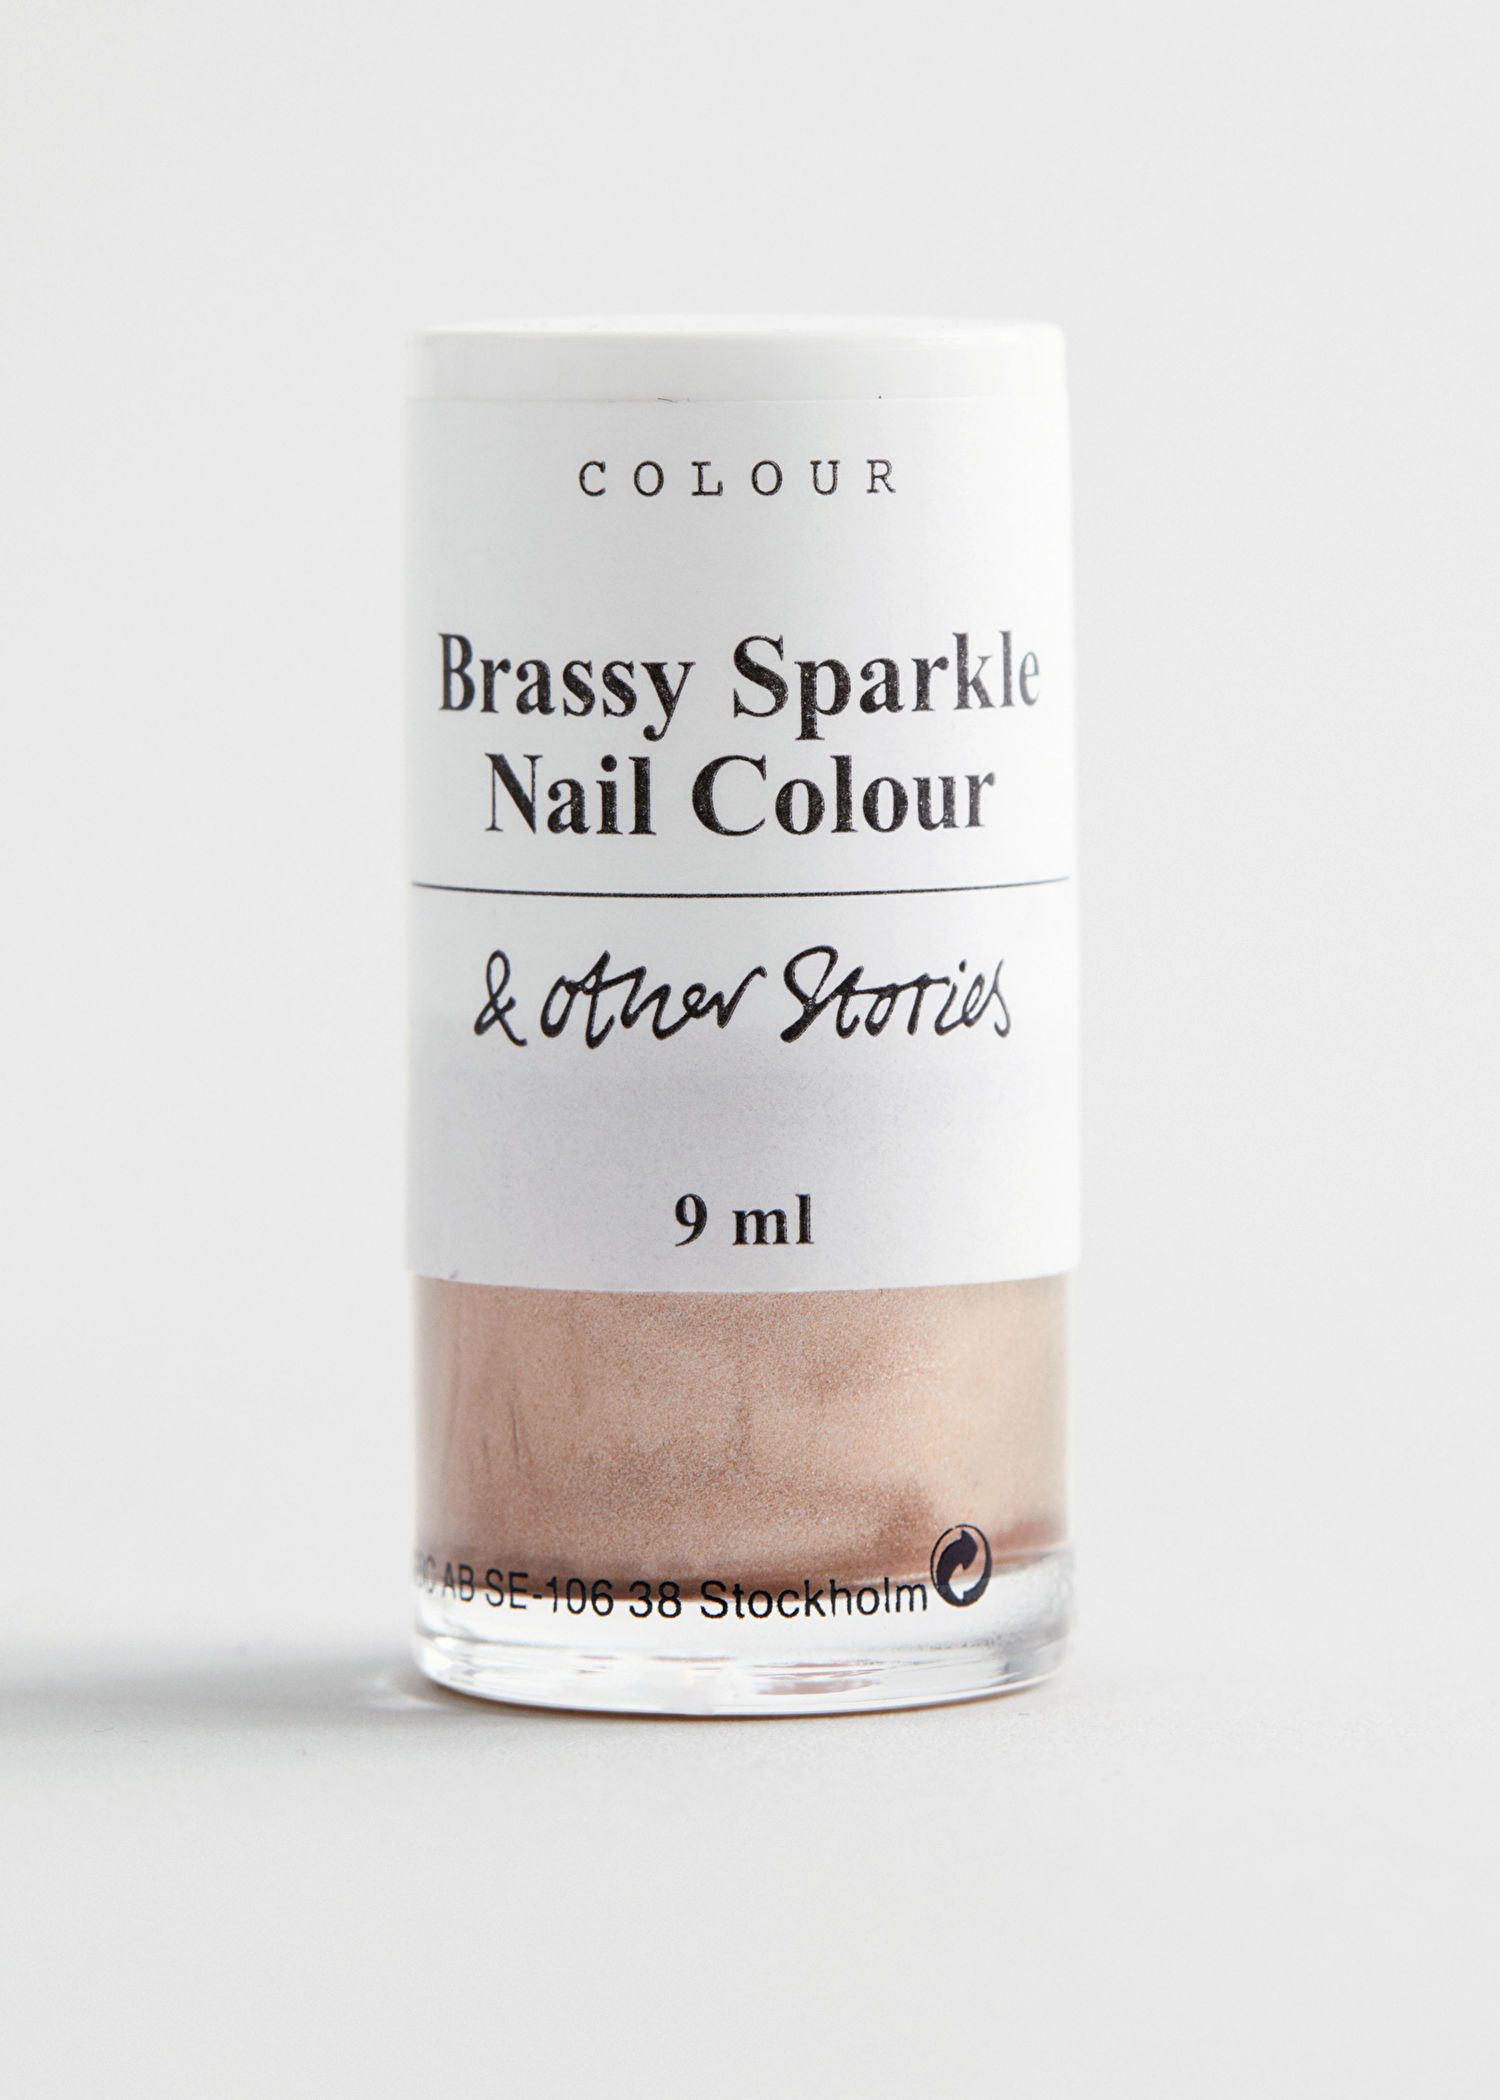 Brassy Sparkle Nail Colour | & Other Stories US